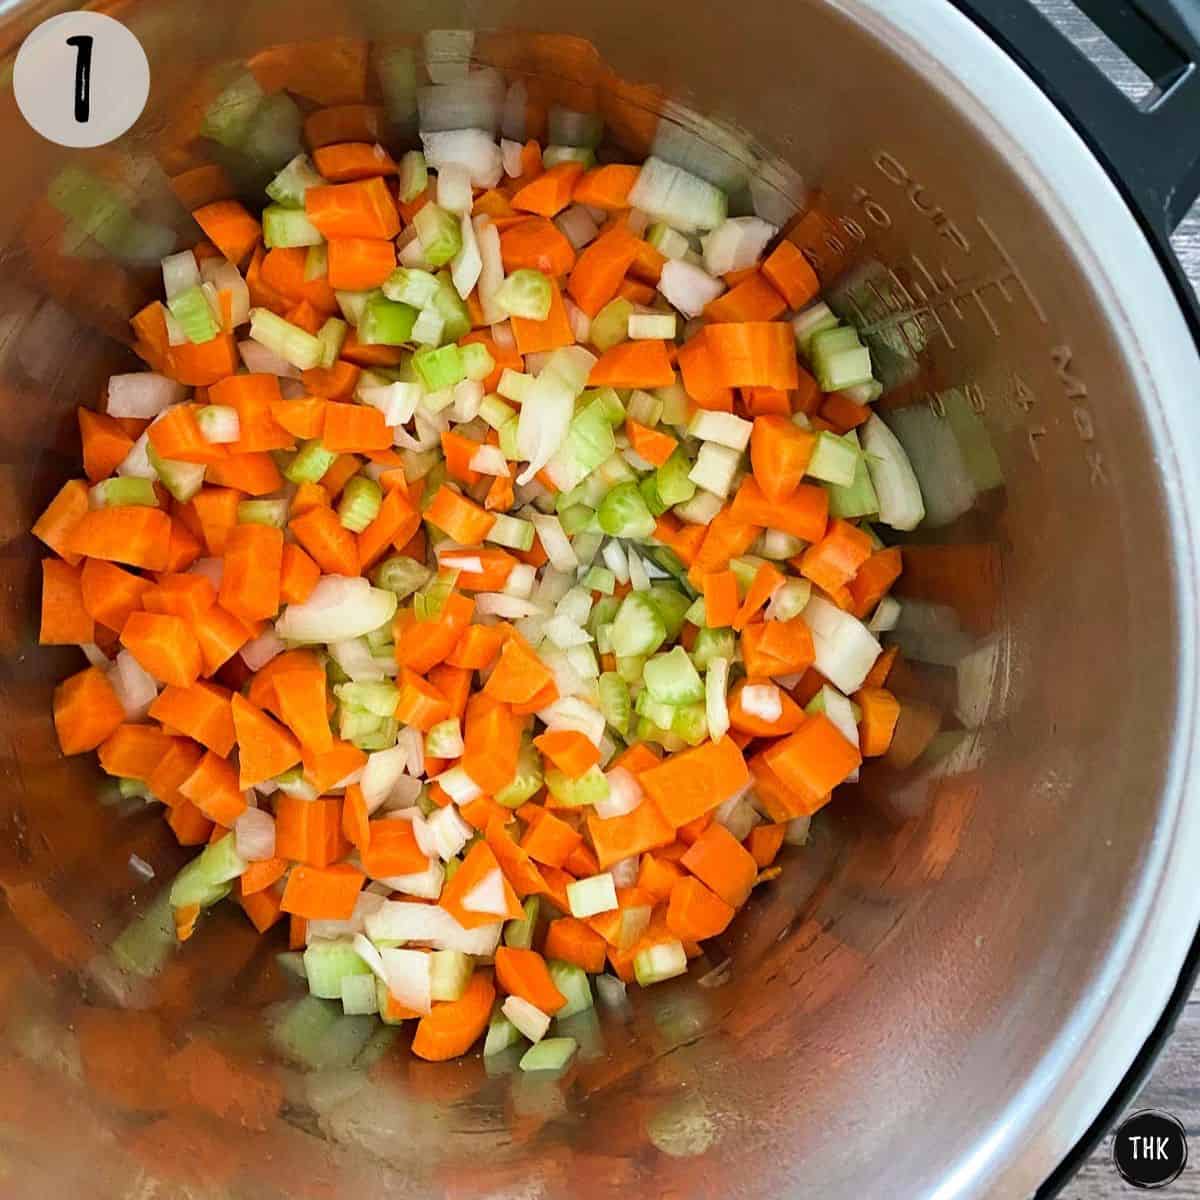 Chopped onion, carrots and celery inside Instant Pot.